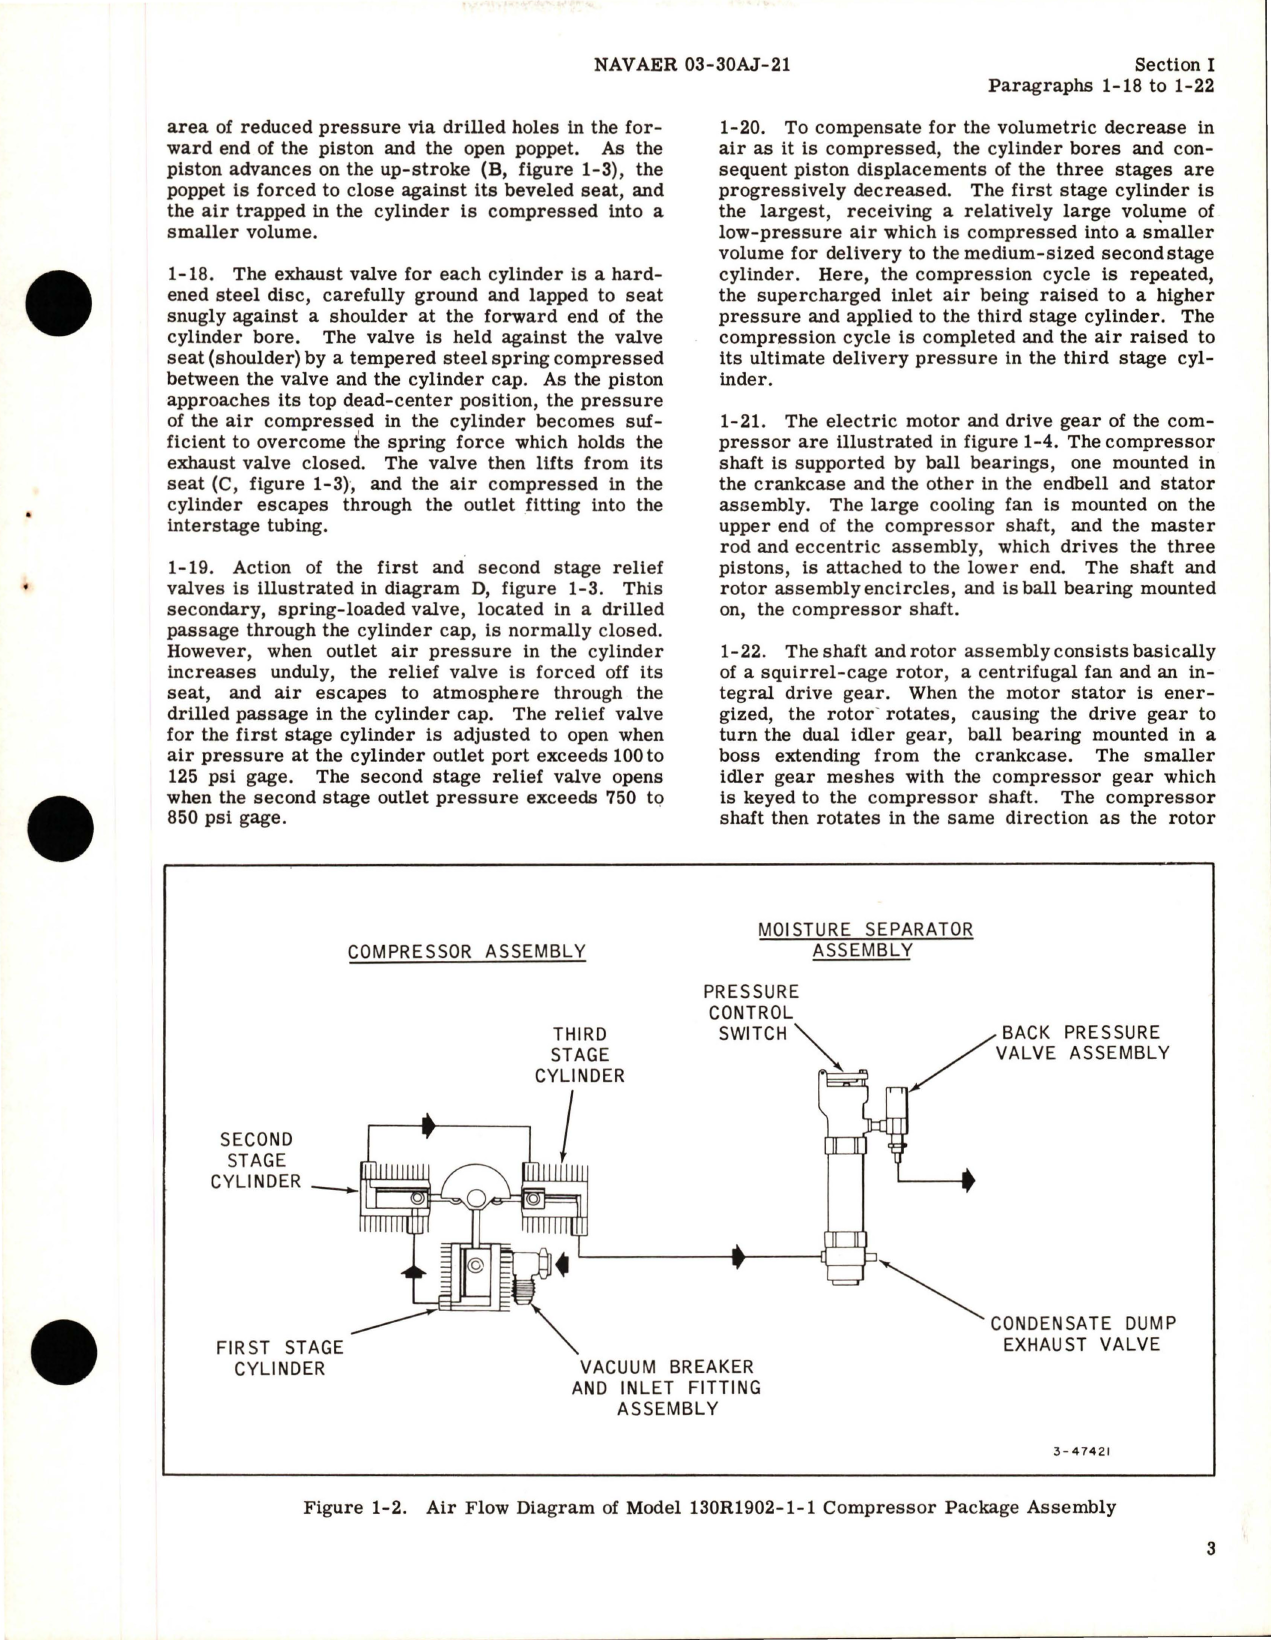 Sample page 7 from AirCorps Library document: Operation and Maintenance Instructions for Compressor Package Assembly - Models 130R1902 and 130R1902-1-1